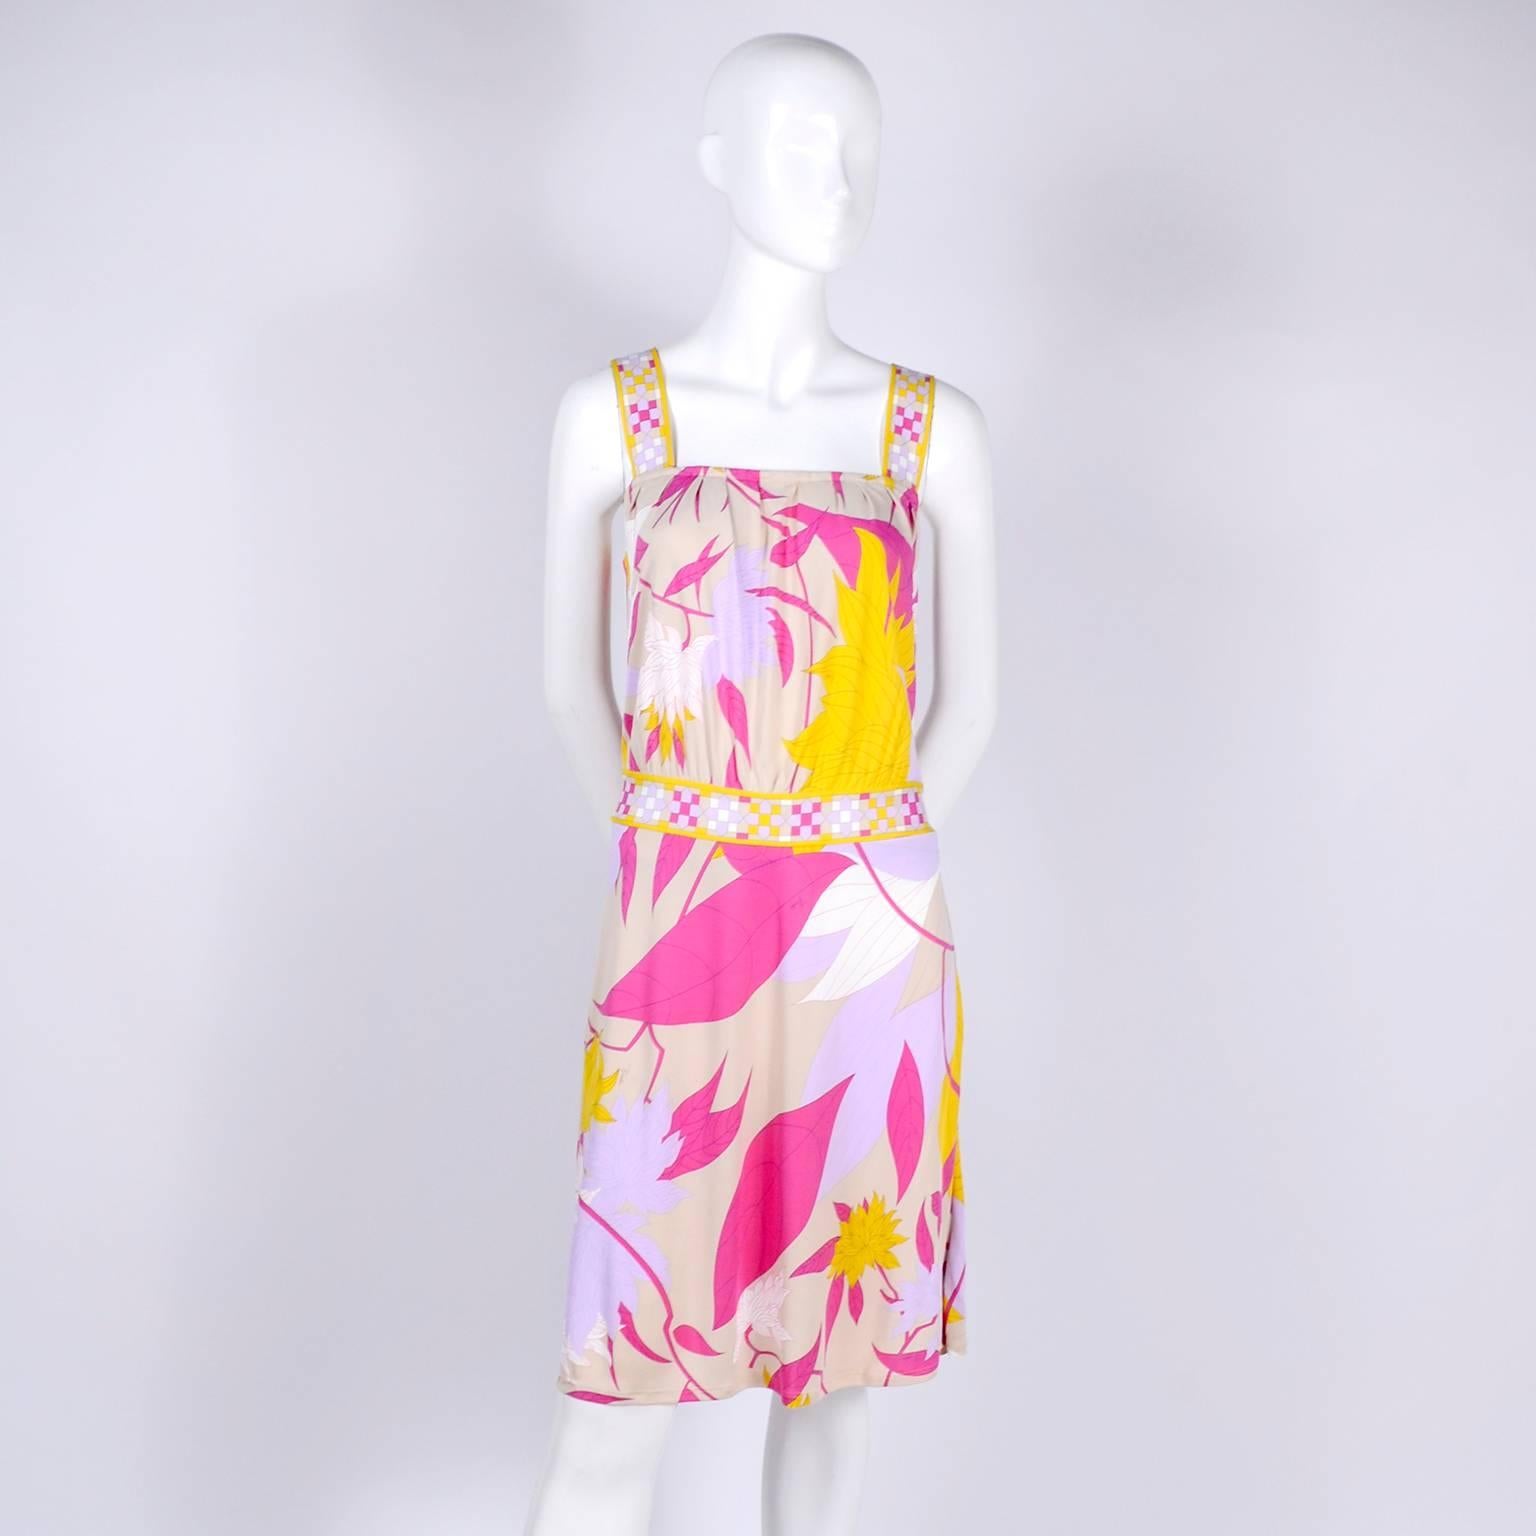 Pucci Rayon Jersey Leaf Floral Print Dress in Pink Cream Yellow and Lavender 10 1